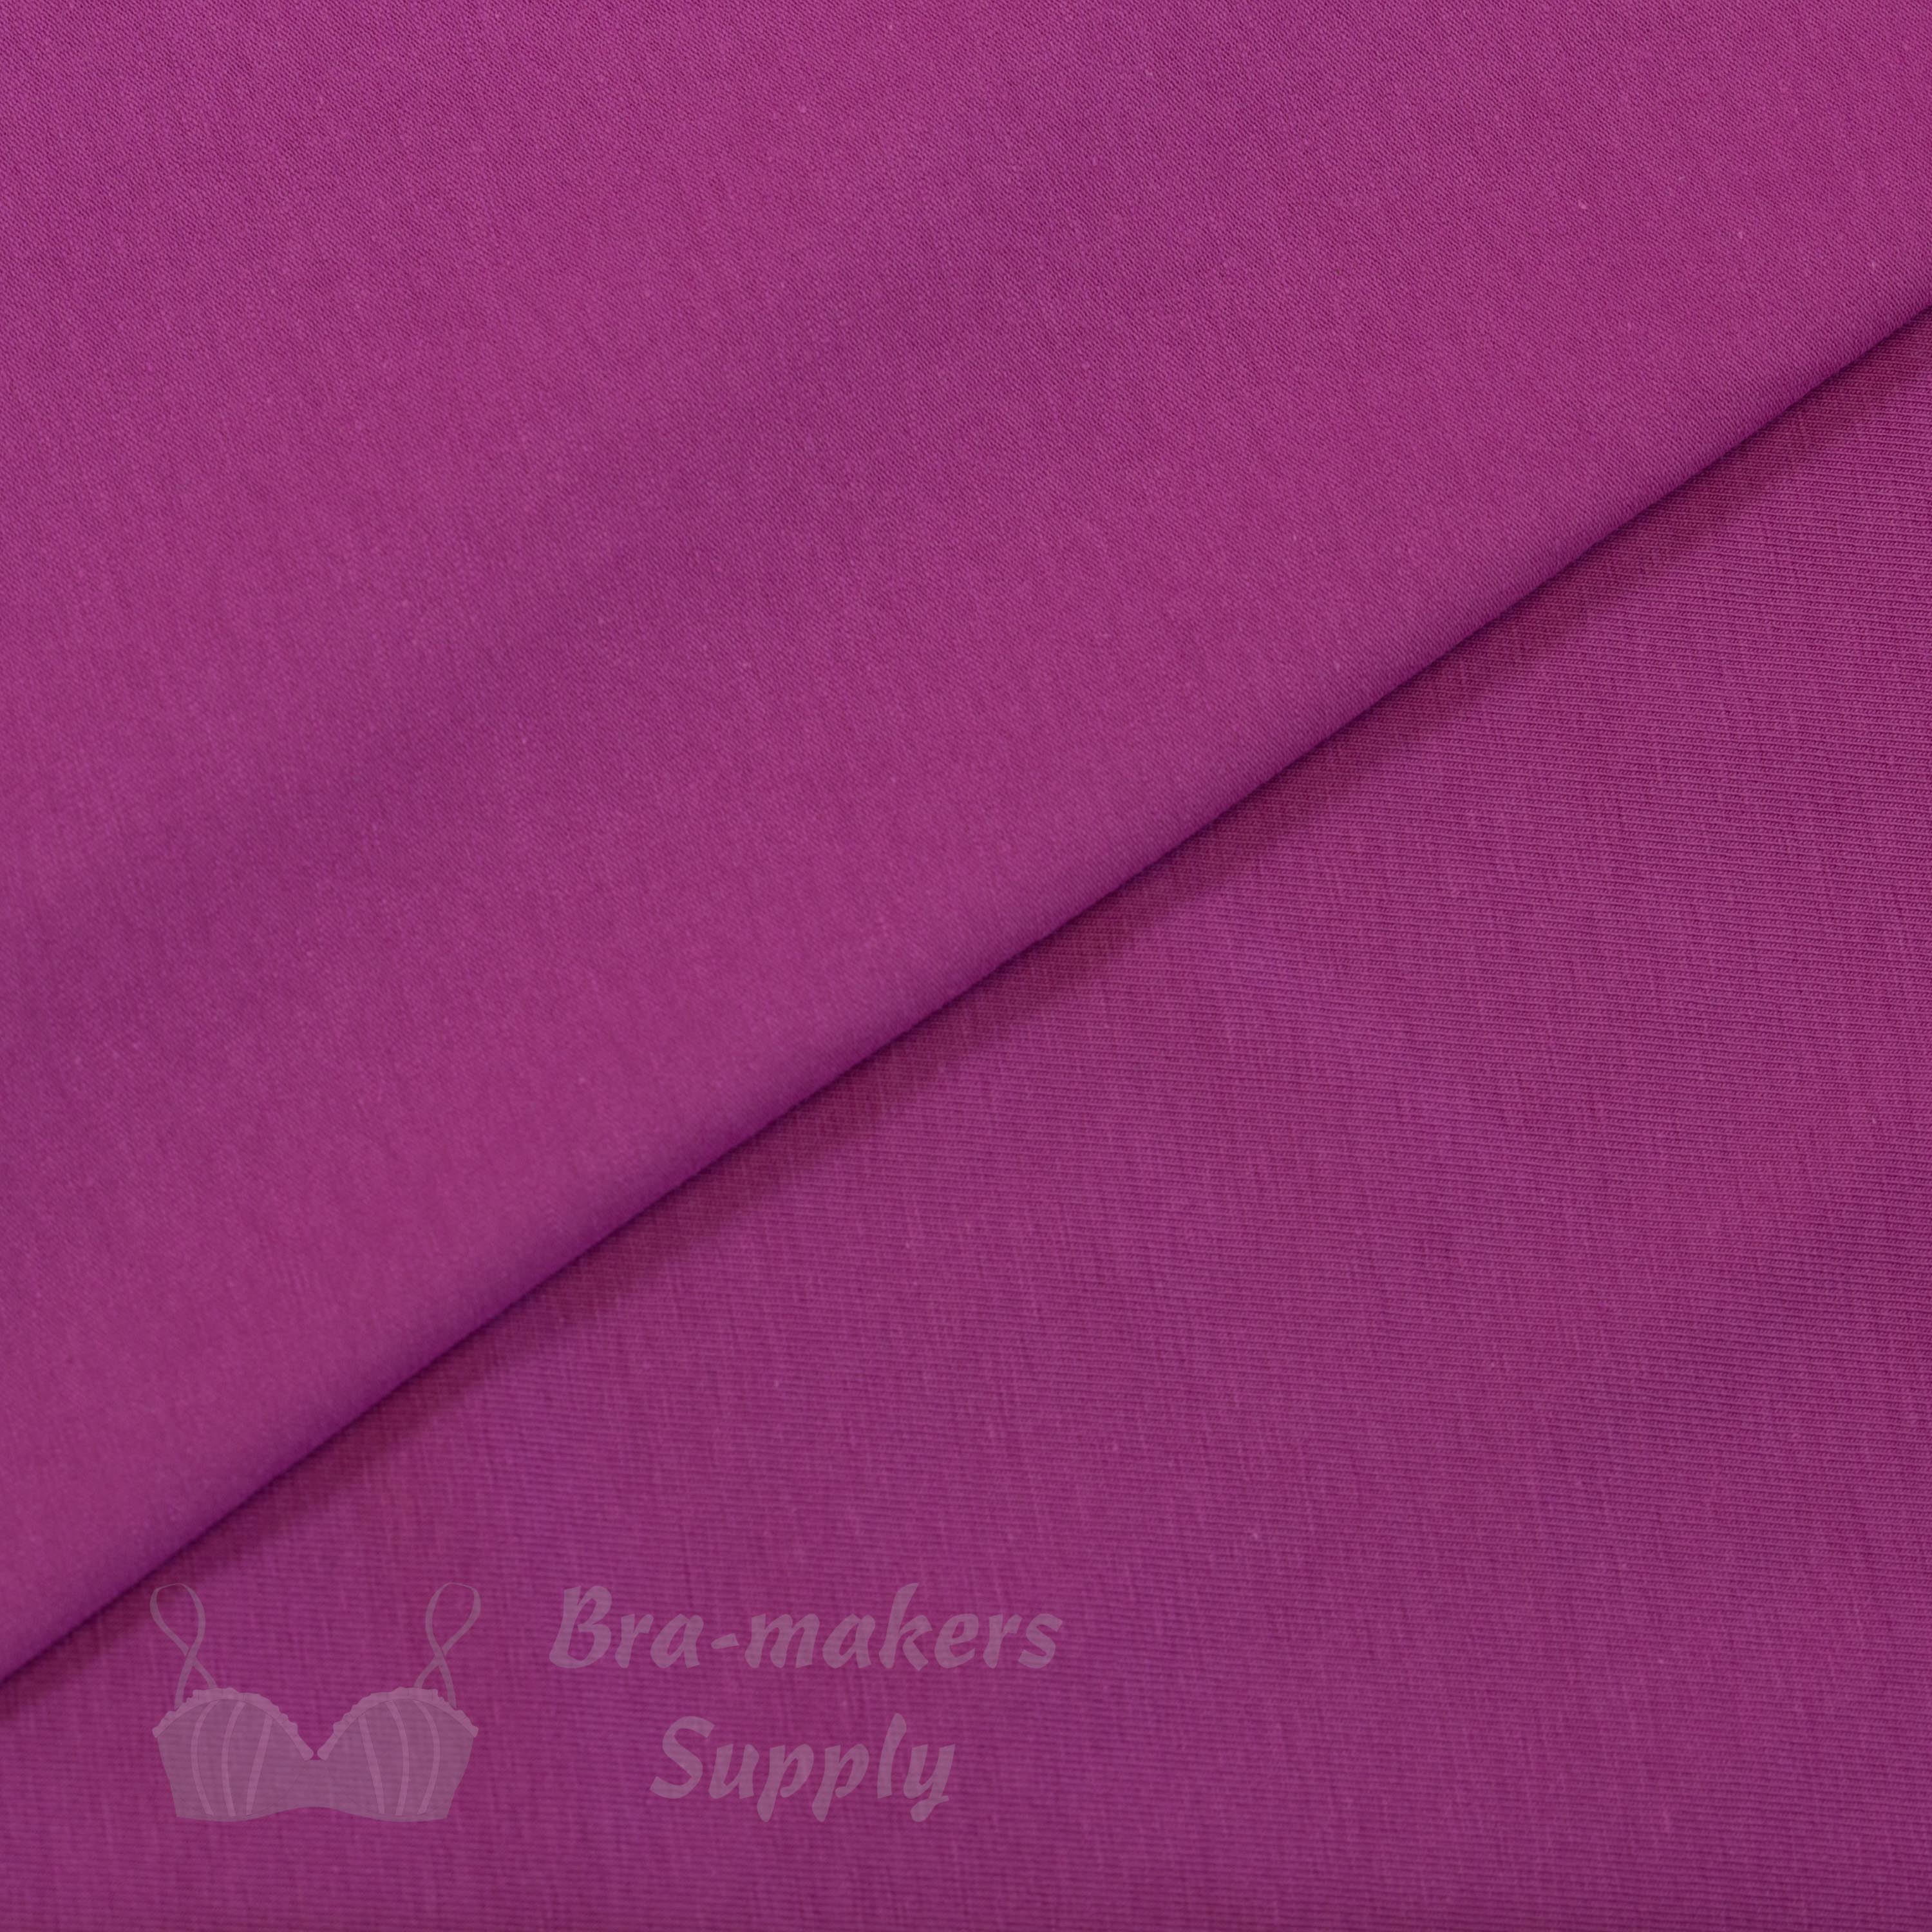 active cotton spandex fabric wickable fabric FC-75 fuchsia from Bra-Makers Supply folded shown